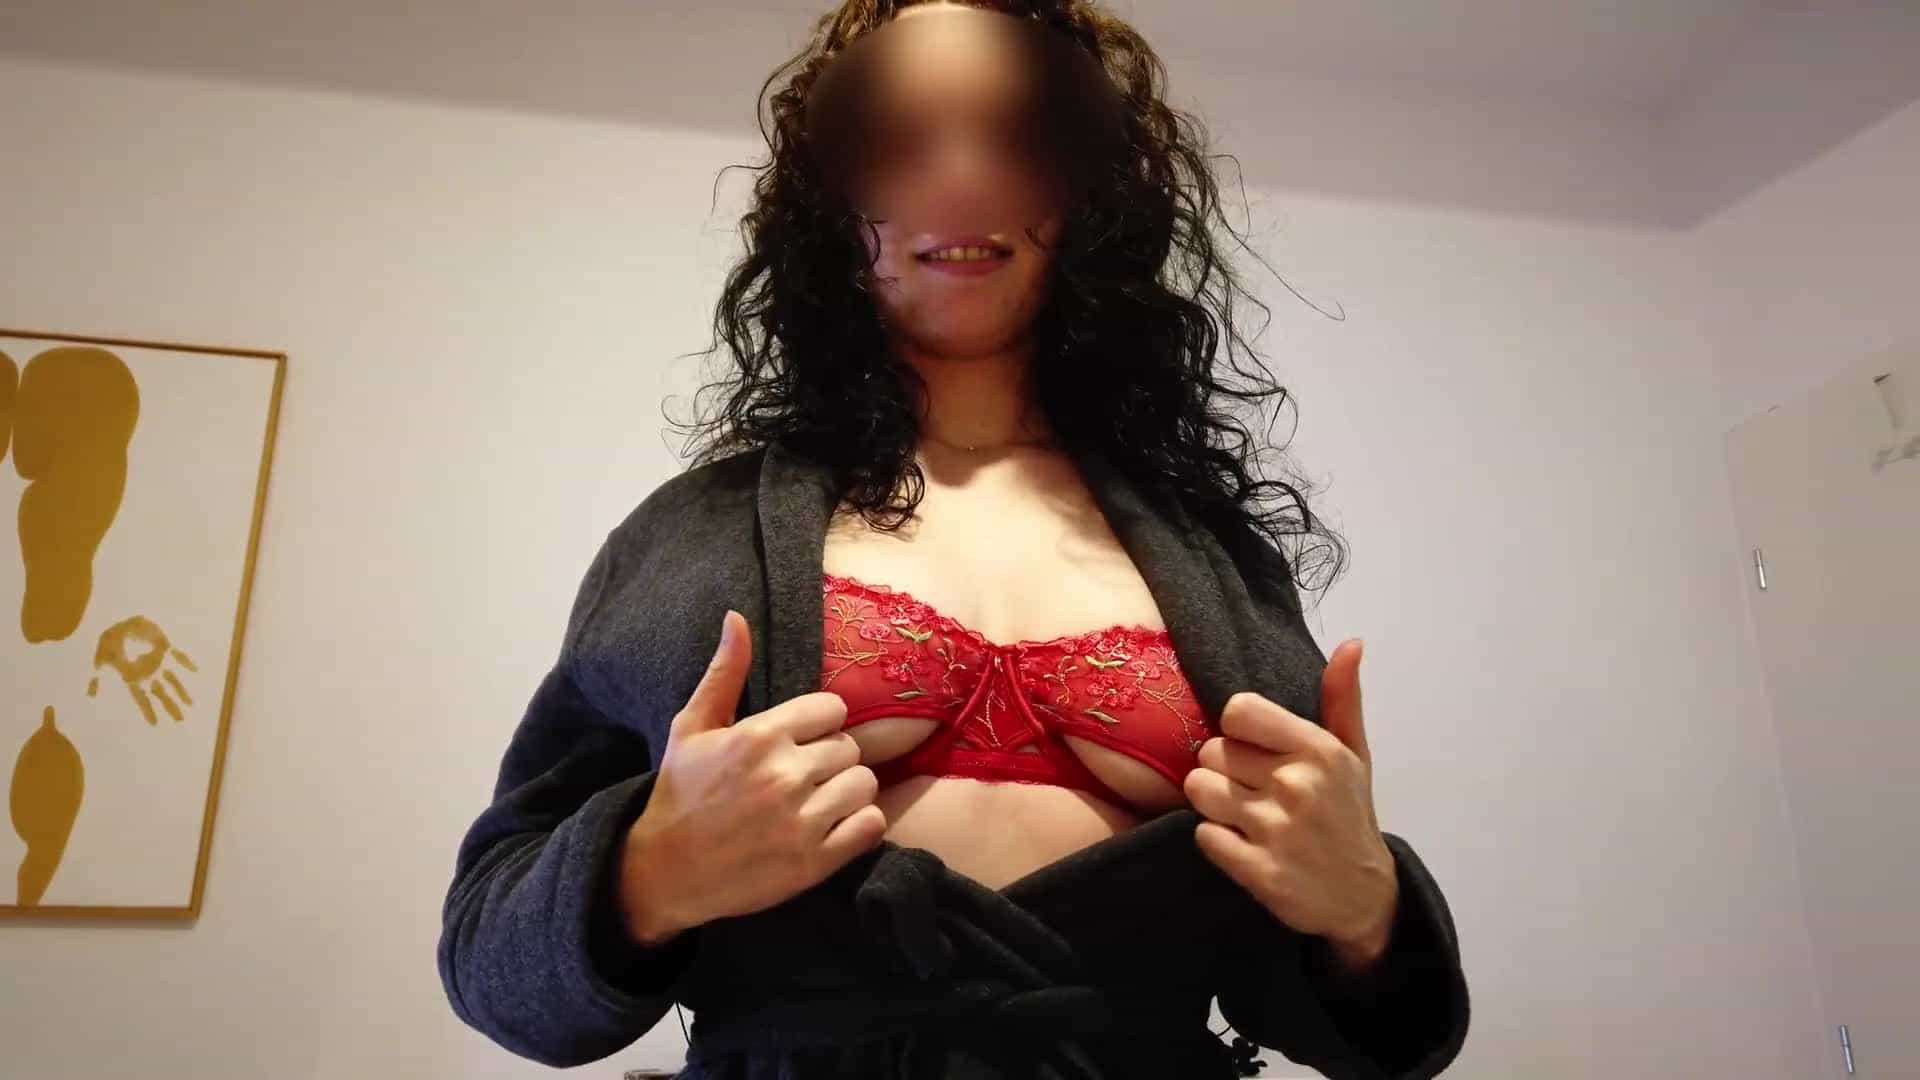 I was hired as an escort, and I had such a blast doing everything I was told